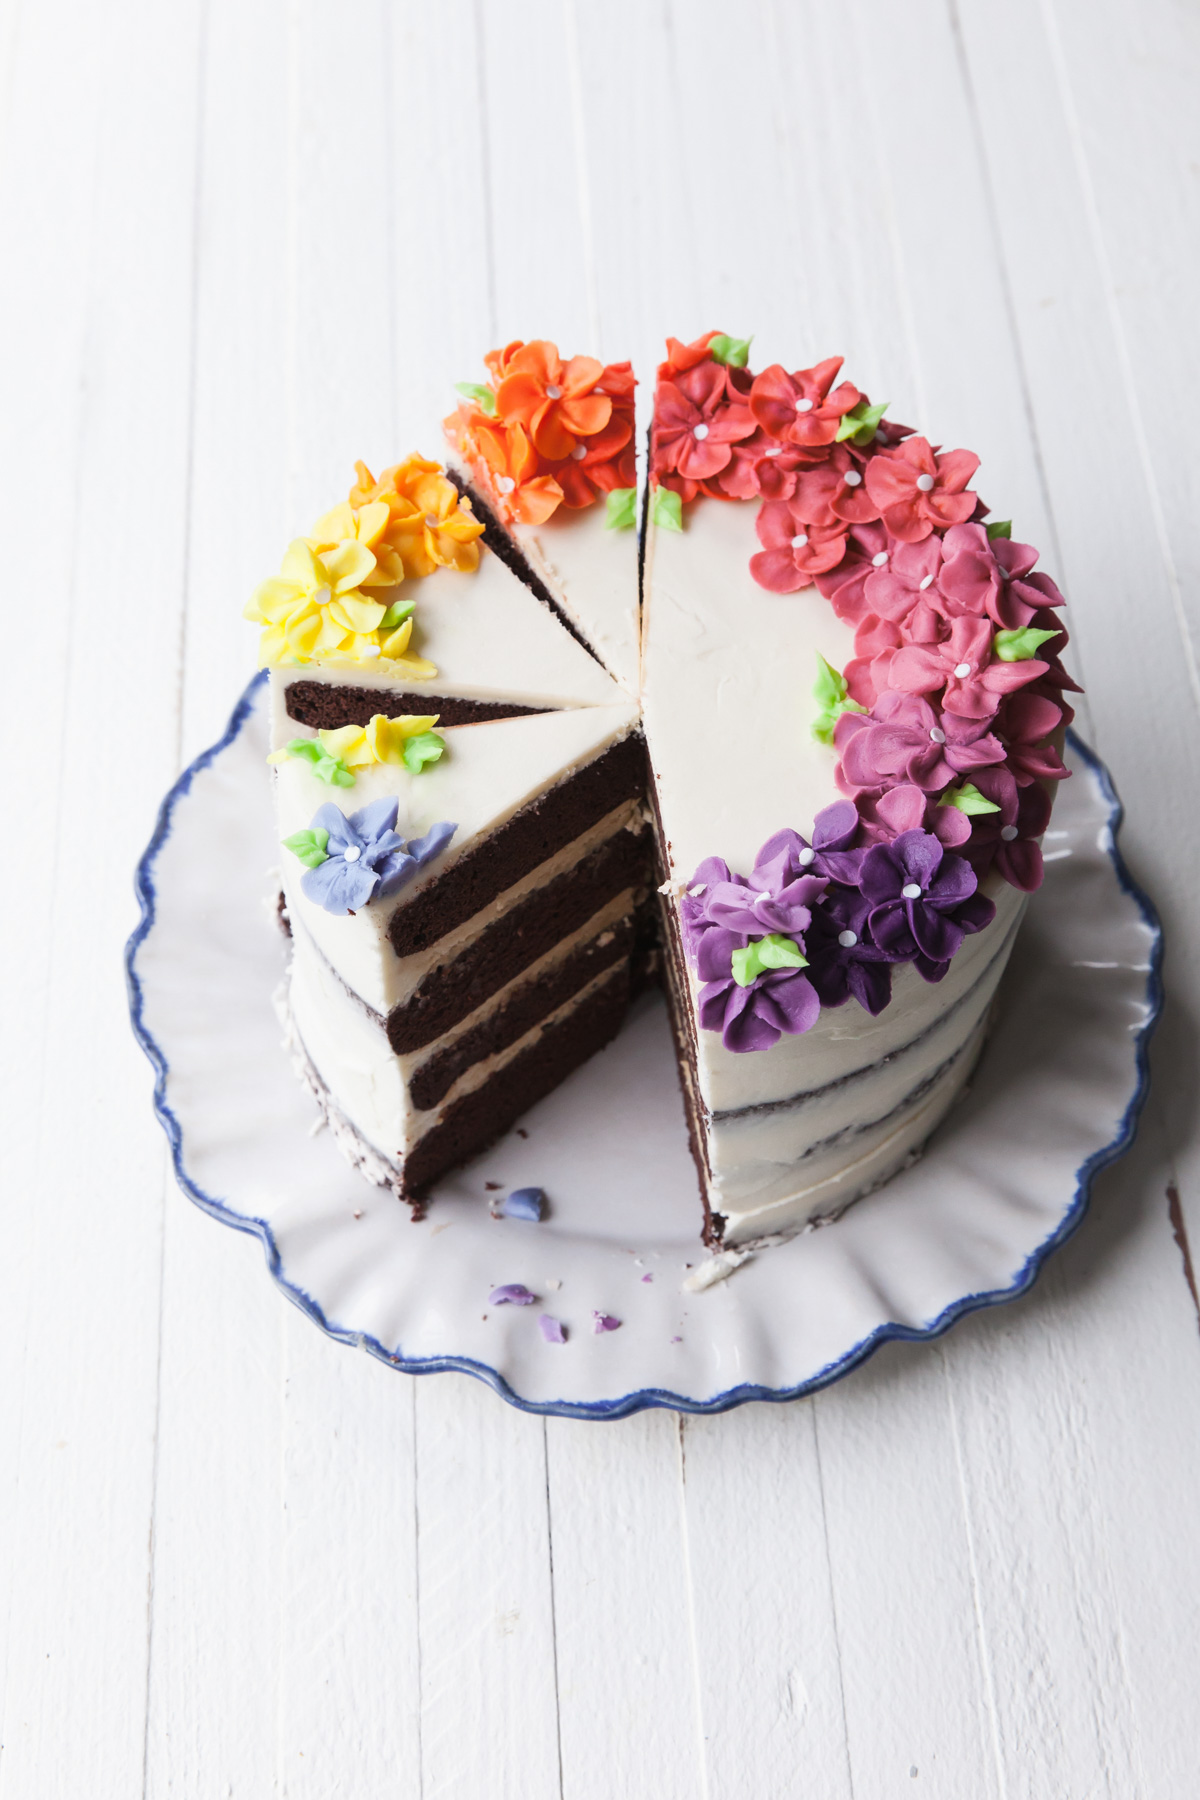 A chocolate cake with rainbow buttercream flowers on top